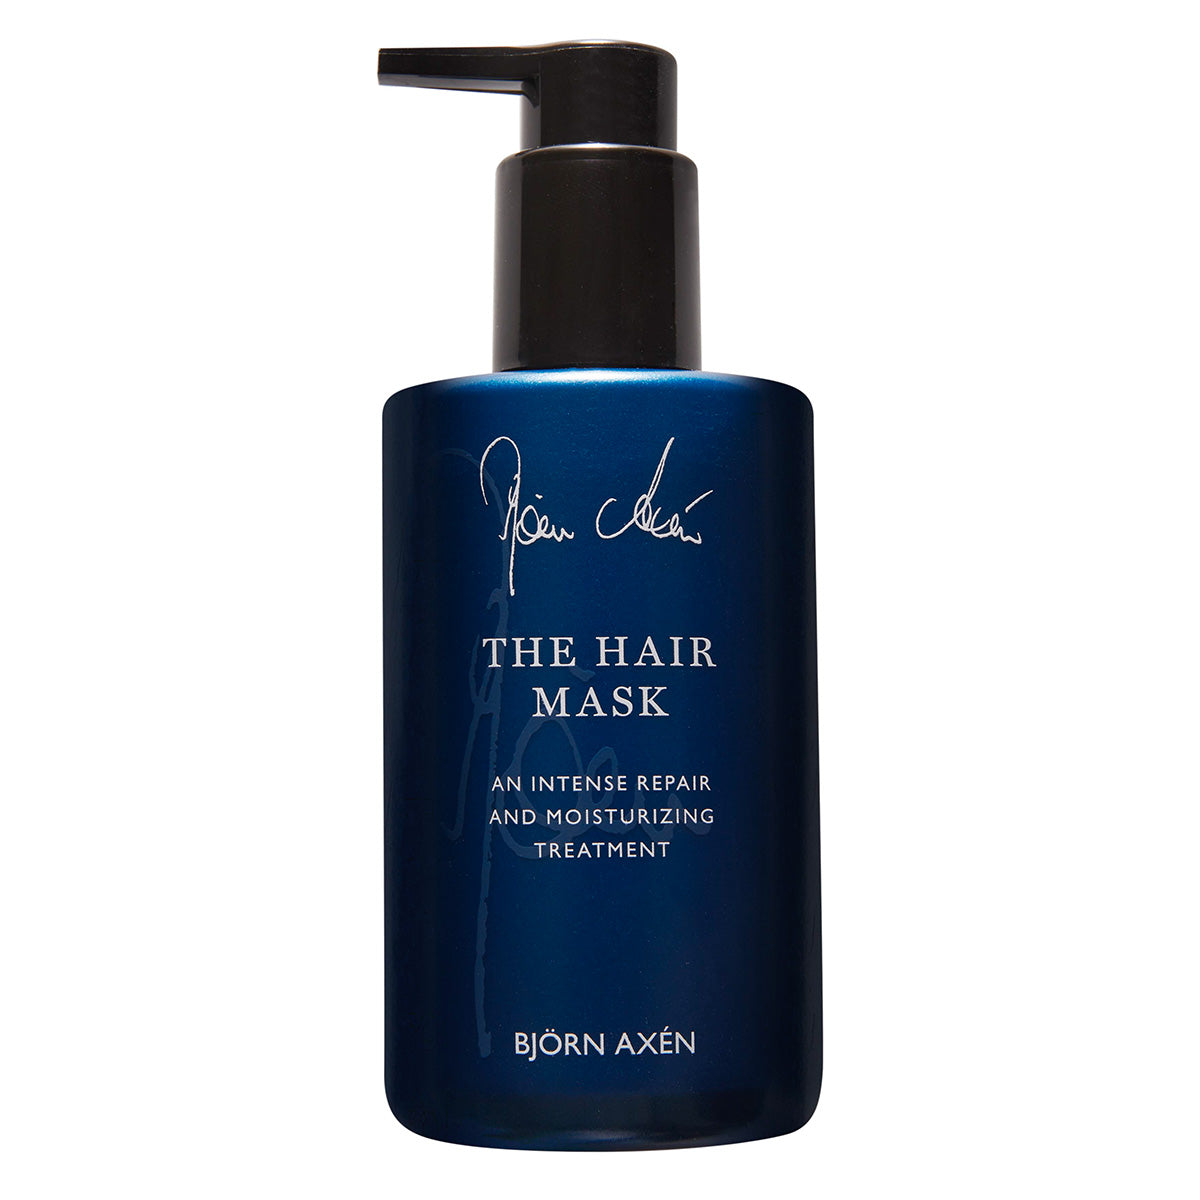 THE HAIR MASK